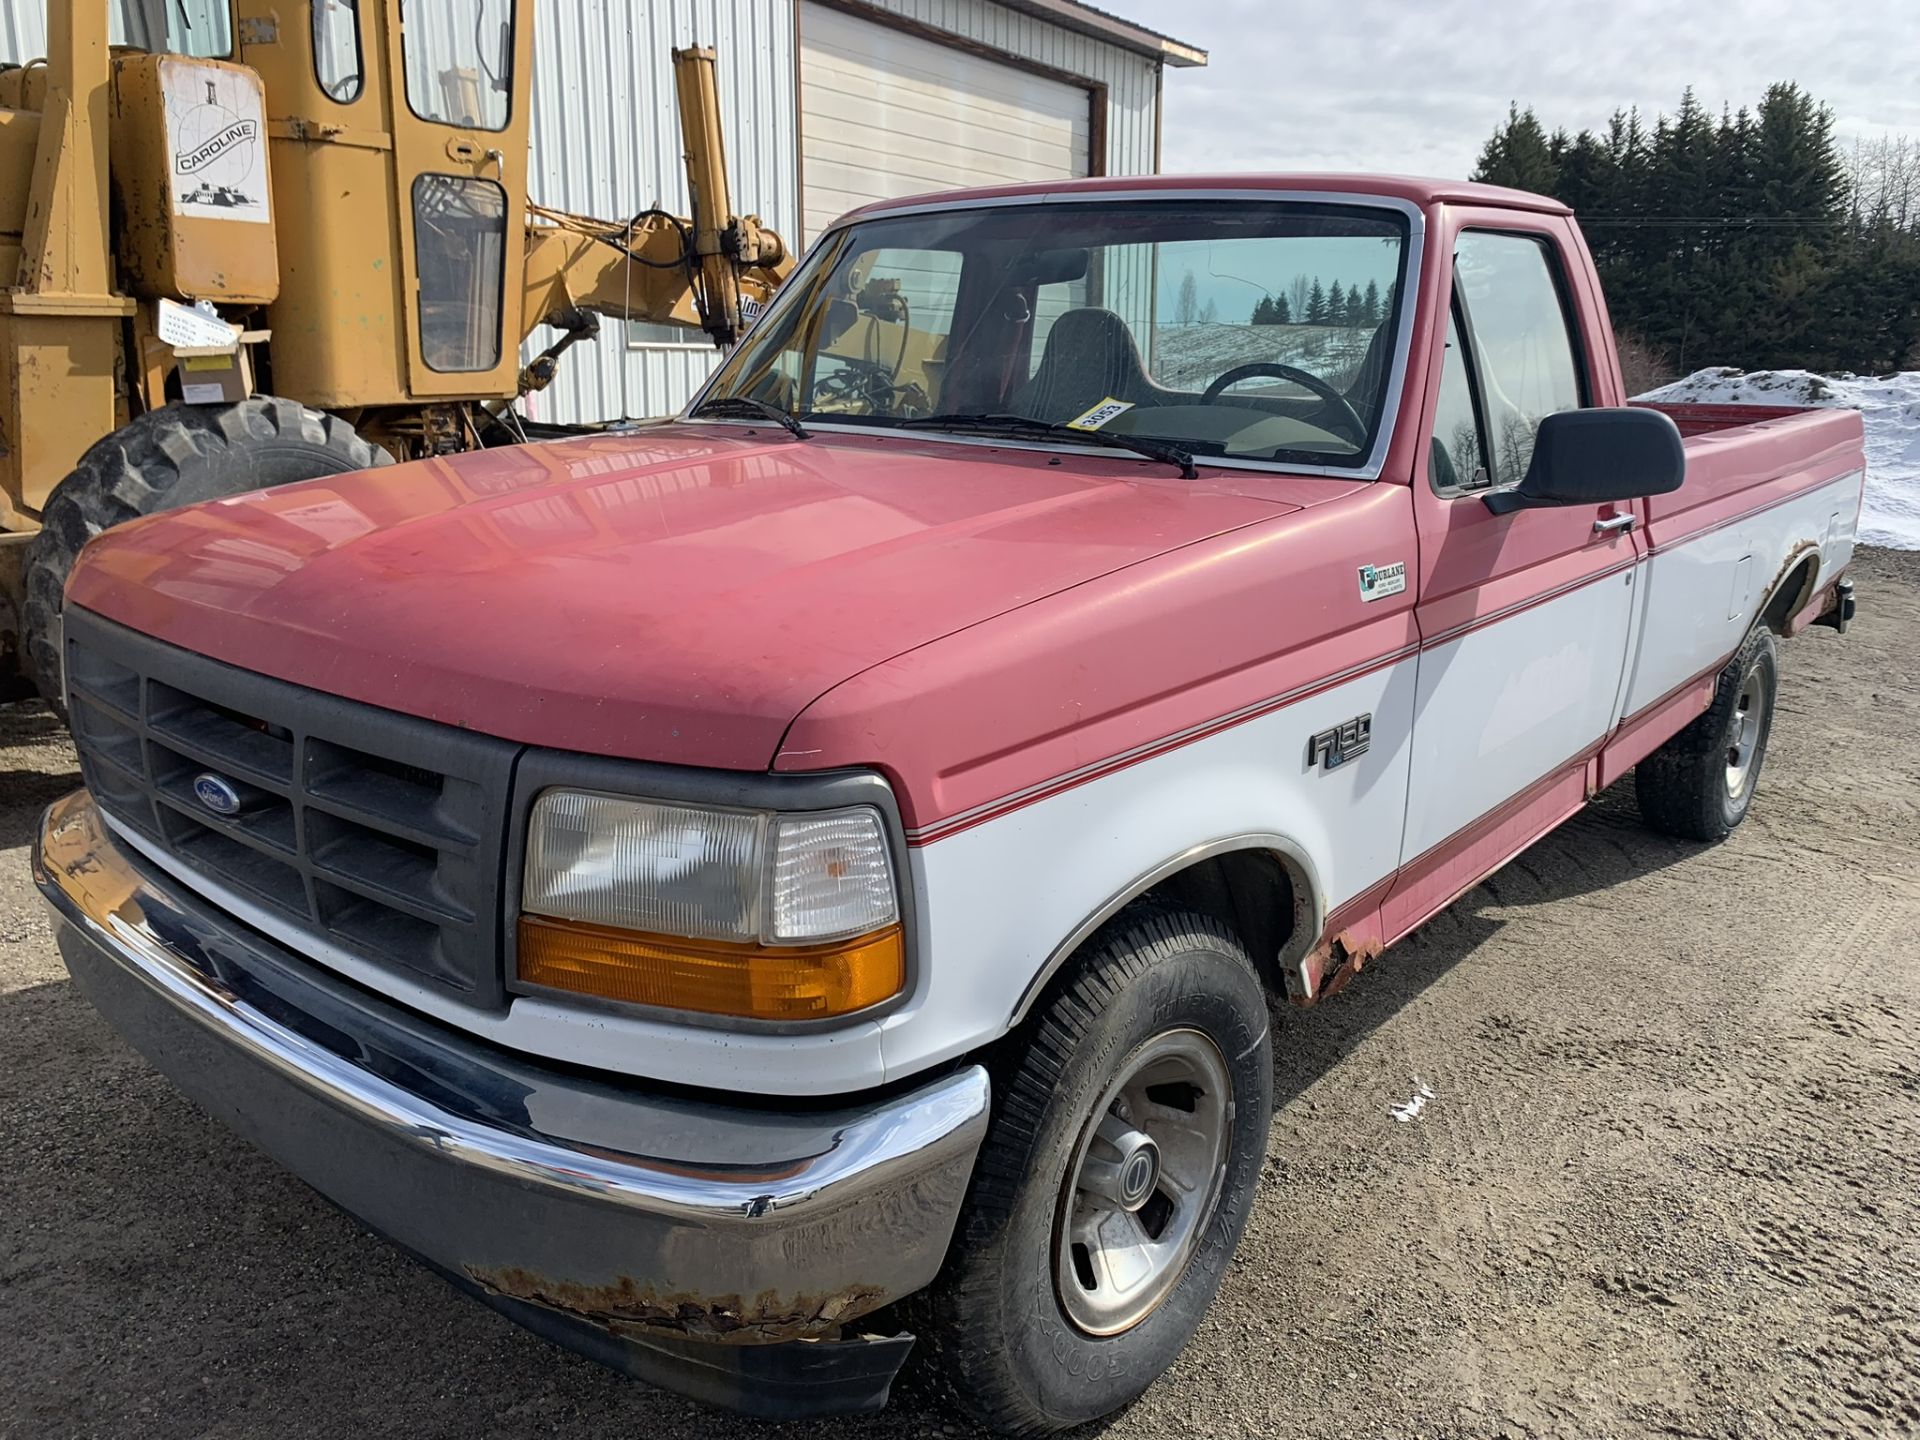 **OFFSITE** 1996 FORD F150 PICKUP TRUCK S/N 2FTEF15N9TCA44980, REG.CAB. LONG BOX, A/T UNKNOWN - Image 2 of 6